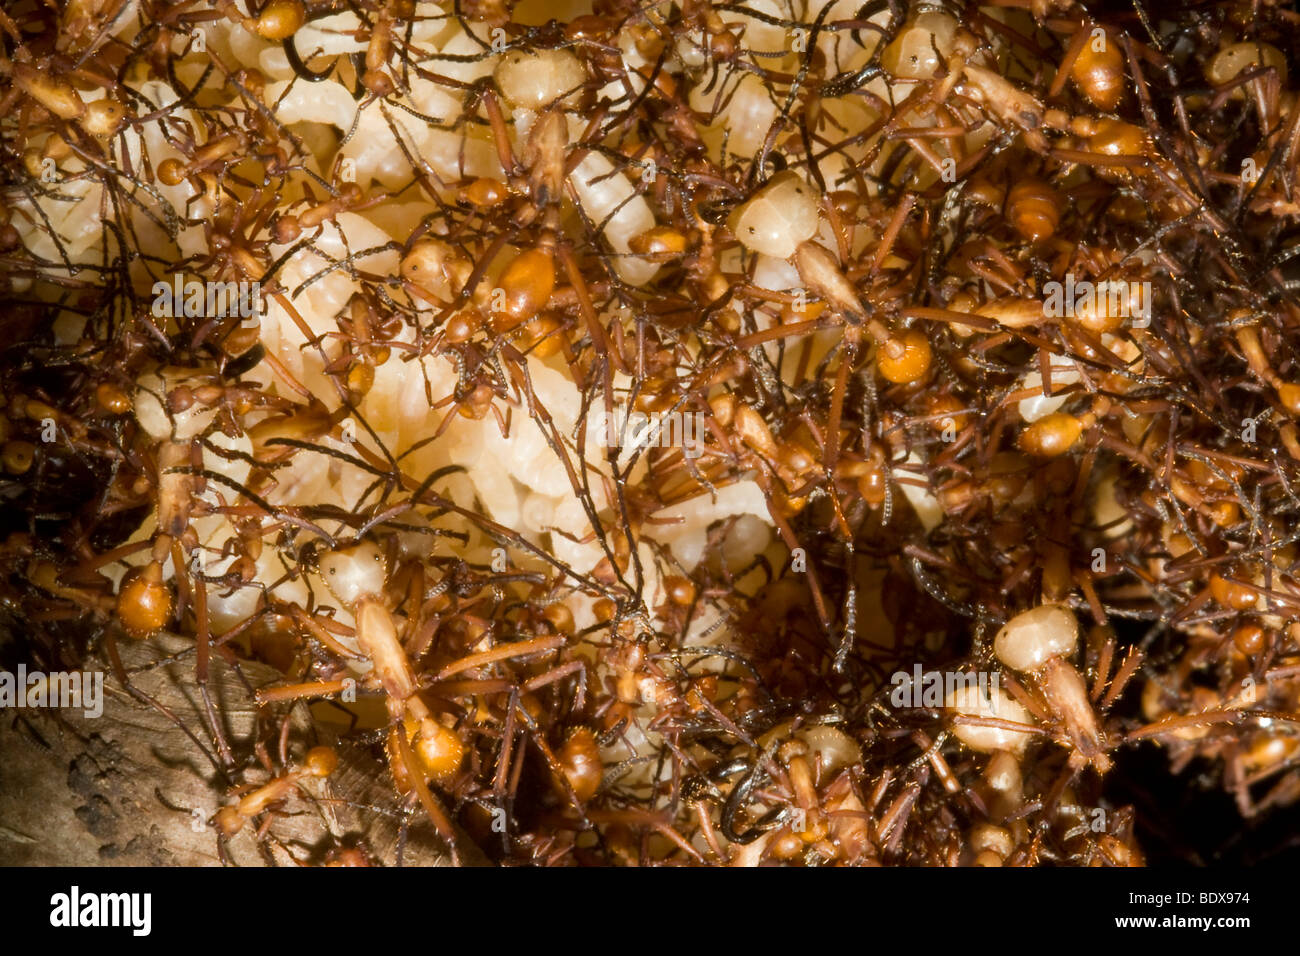 Army ants on the move. Order Hymenoptera, family Formicidae. Photographed in Costa Rica. Stock Photo